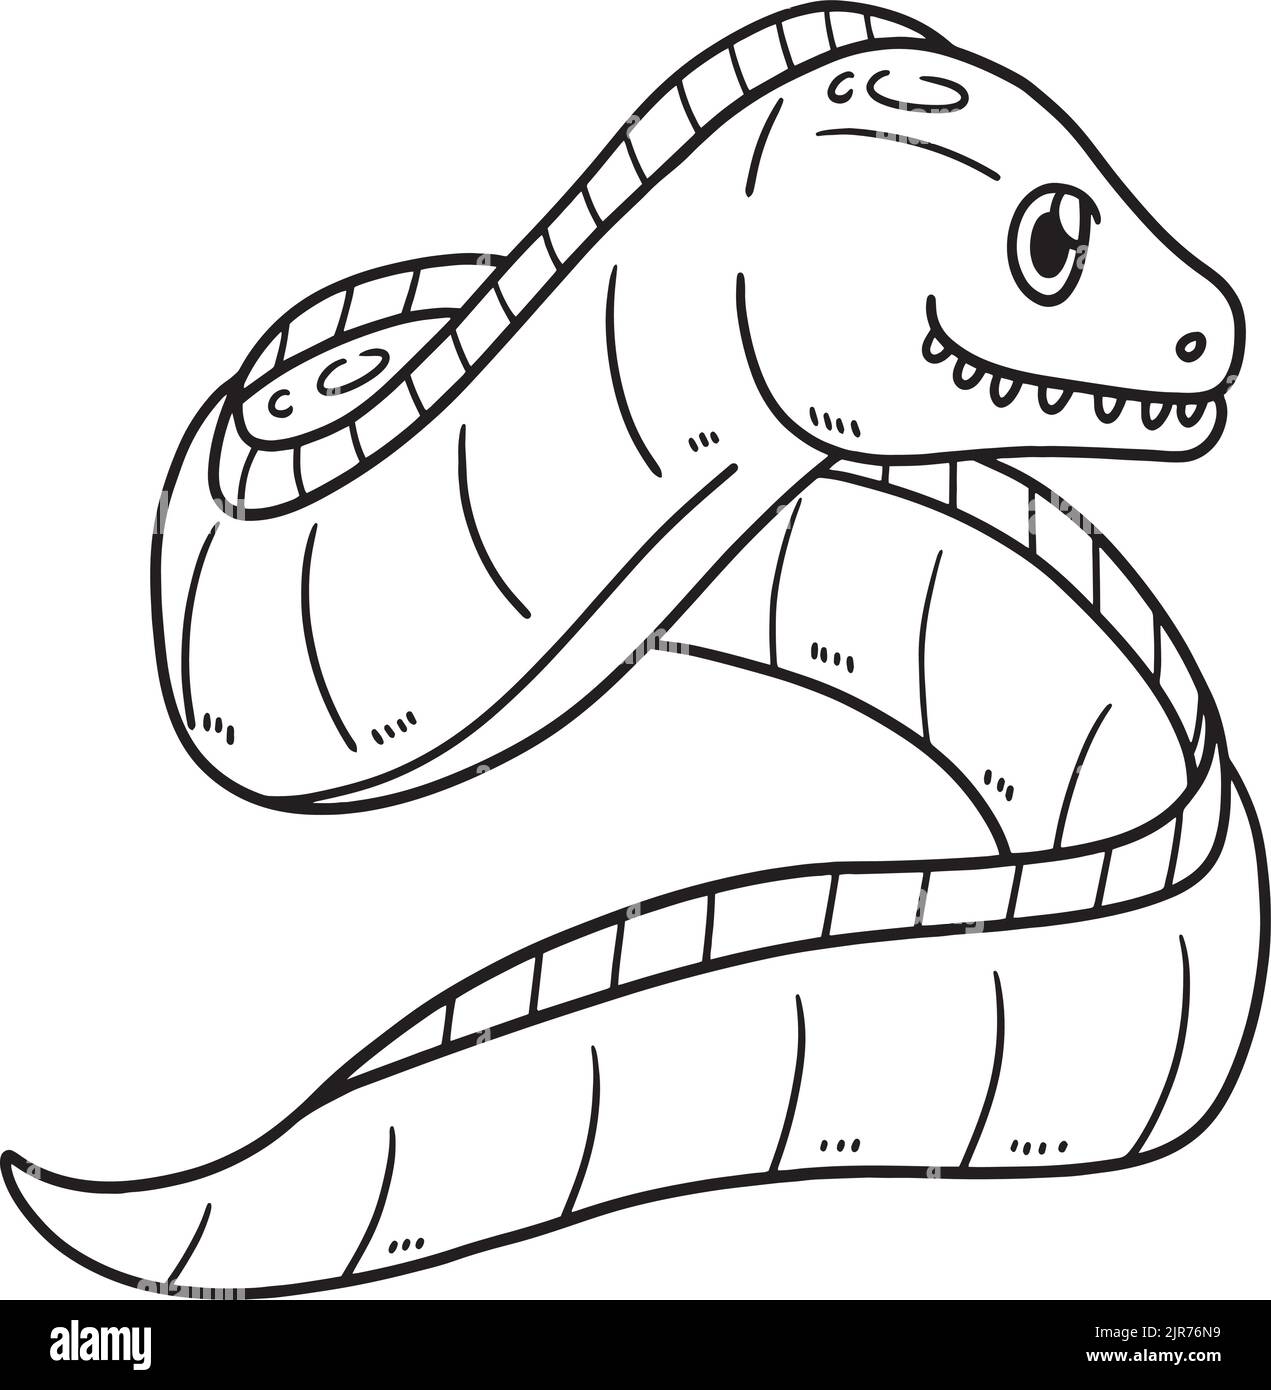 Eel Isolated Coloring Page for Kids Stock Vector